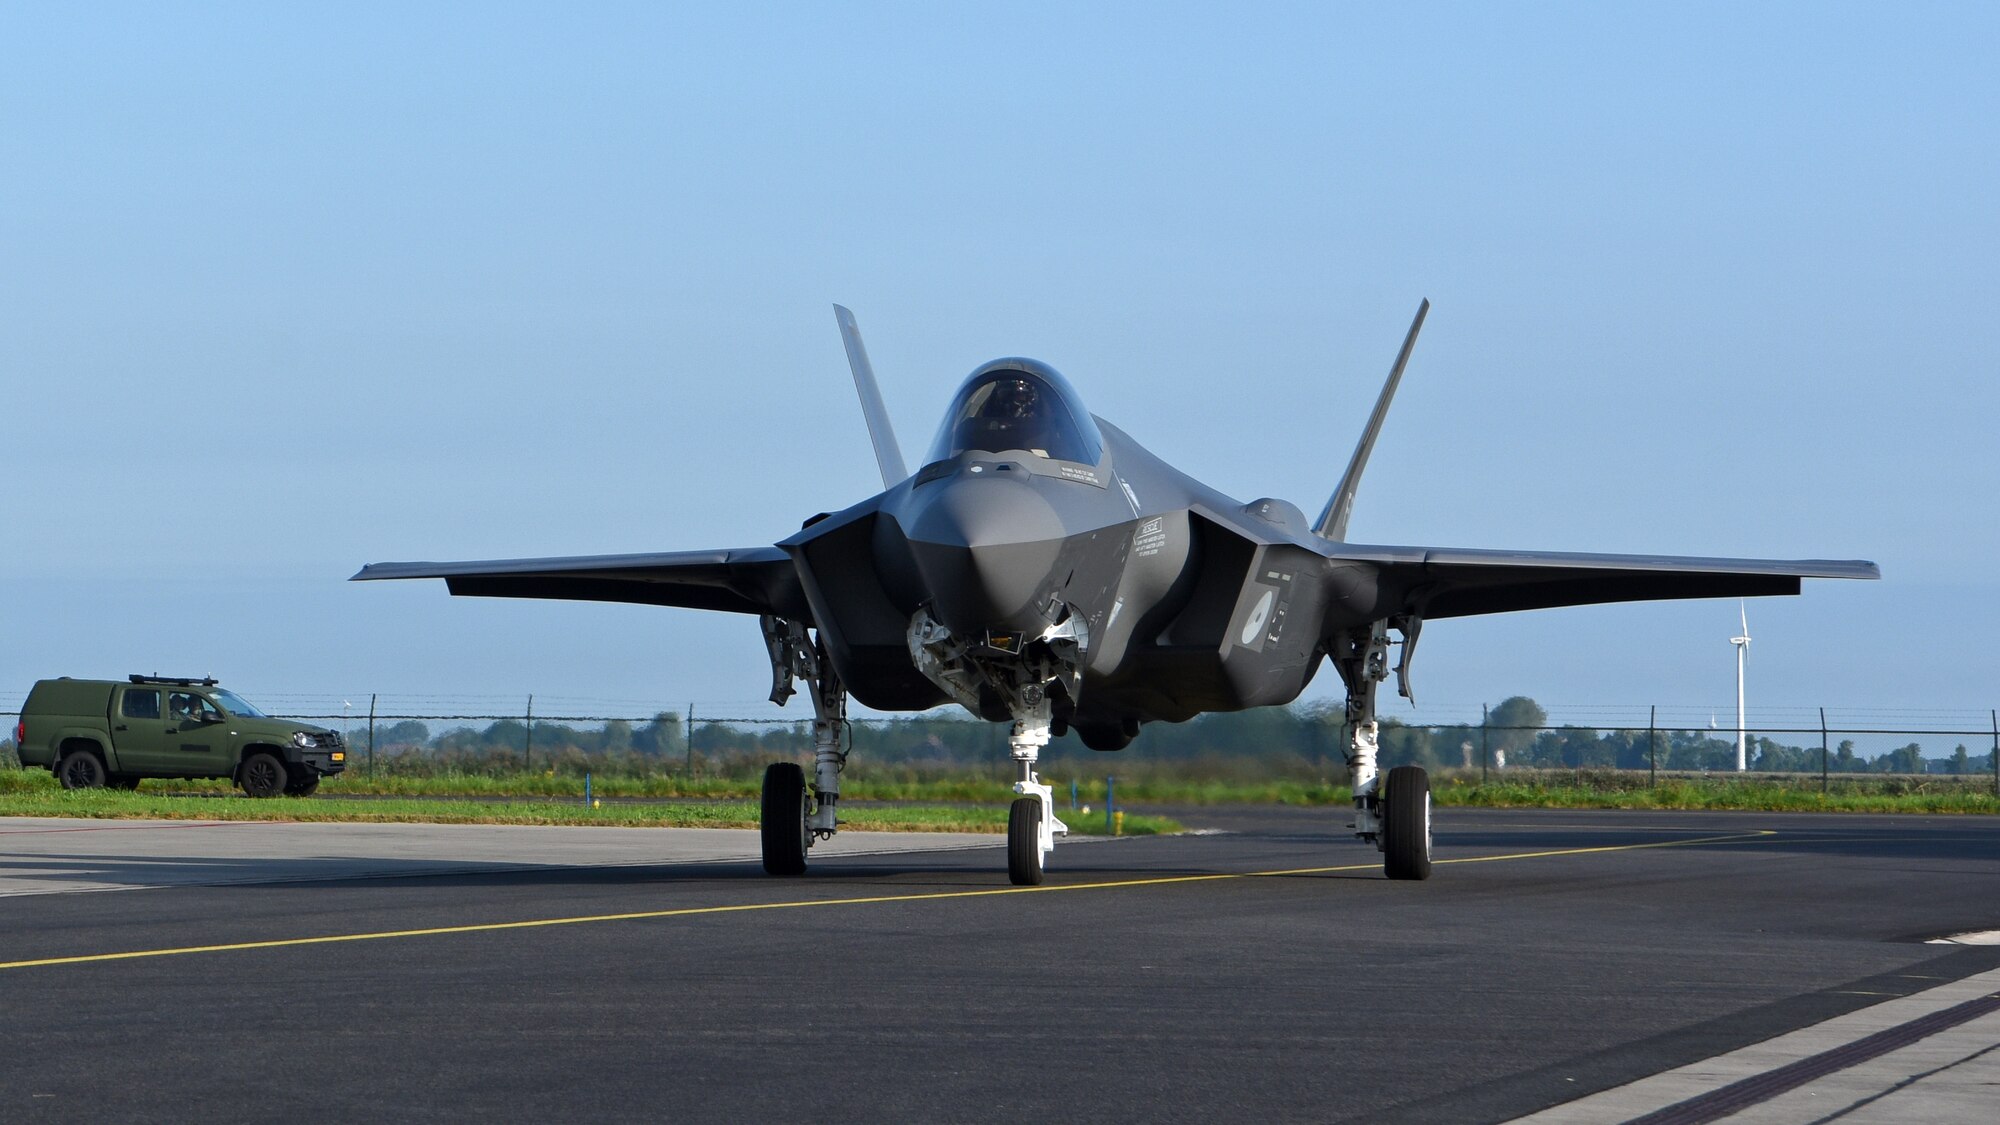 A Royal Netherlands Air Force F-35A Lightning II aircraft taxis at Leeuwarden Air Base, Netherlands, Sept. 14, 2021.  The aircraft participated in the Suppression of Enemy Air Defense phase of a weapons instructor course that included aircraft from the Netherlands, Norway, Belgium and the United States. (U.S. Air Force photo by Tech. Sgt. Anthony Plyler)